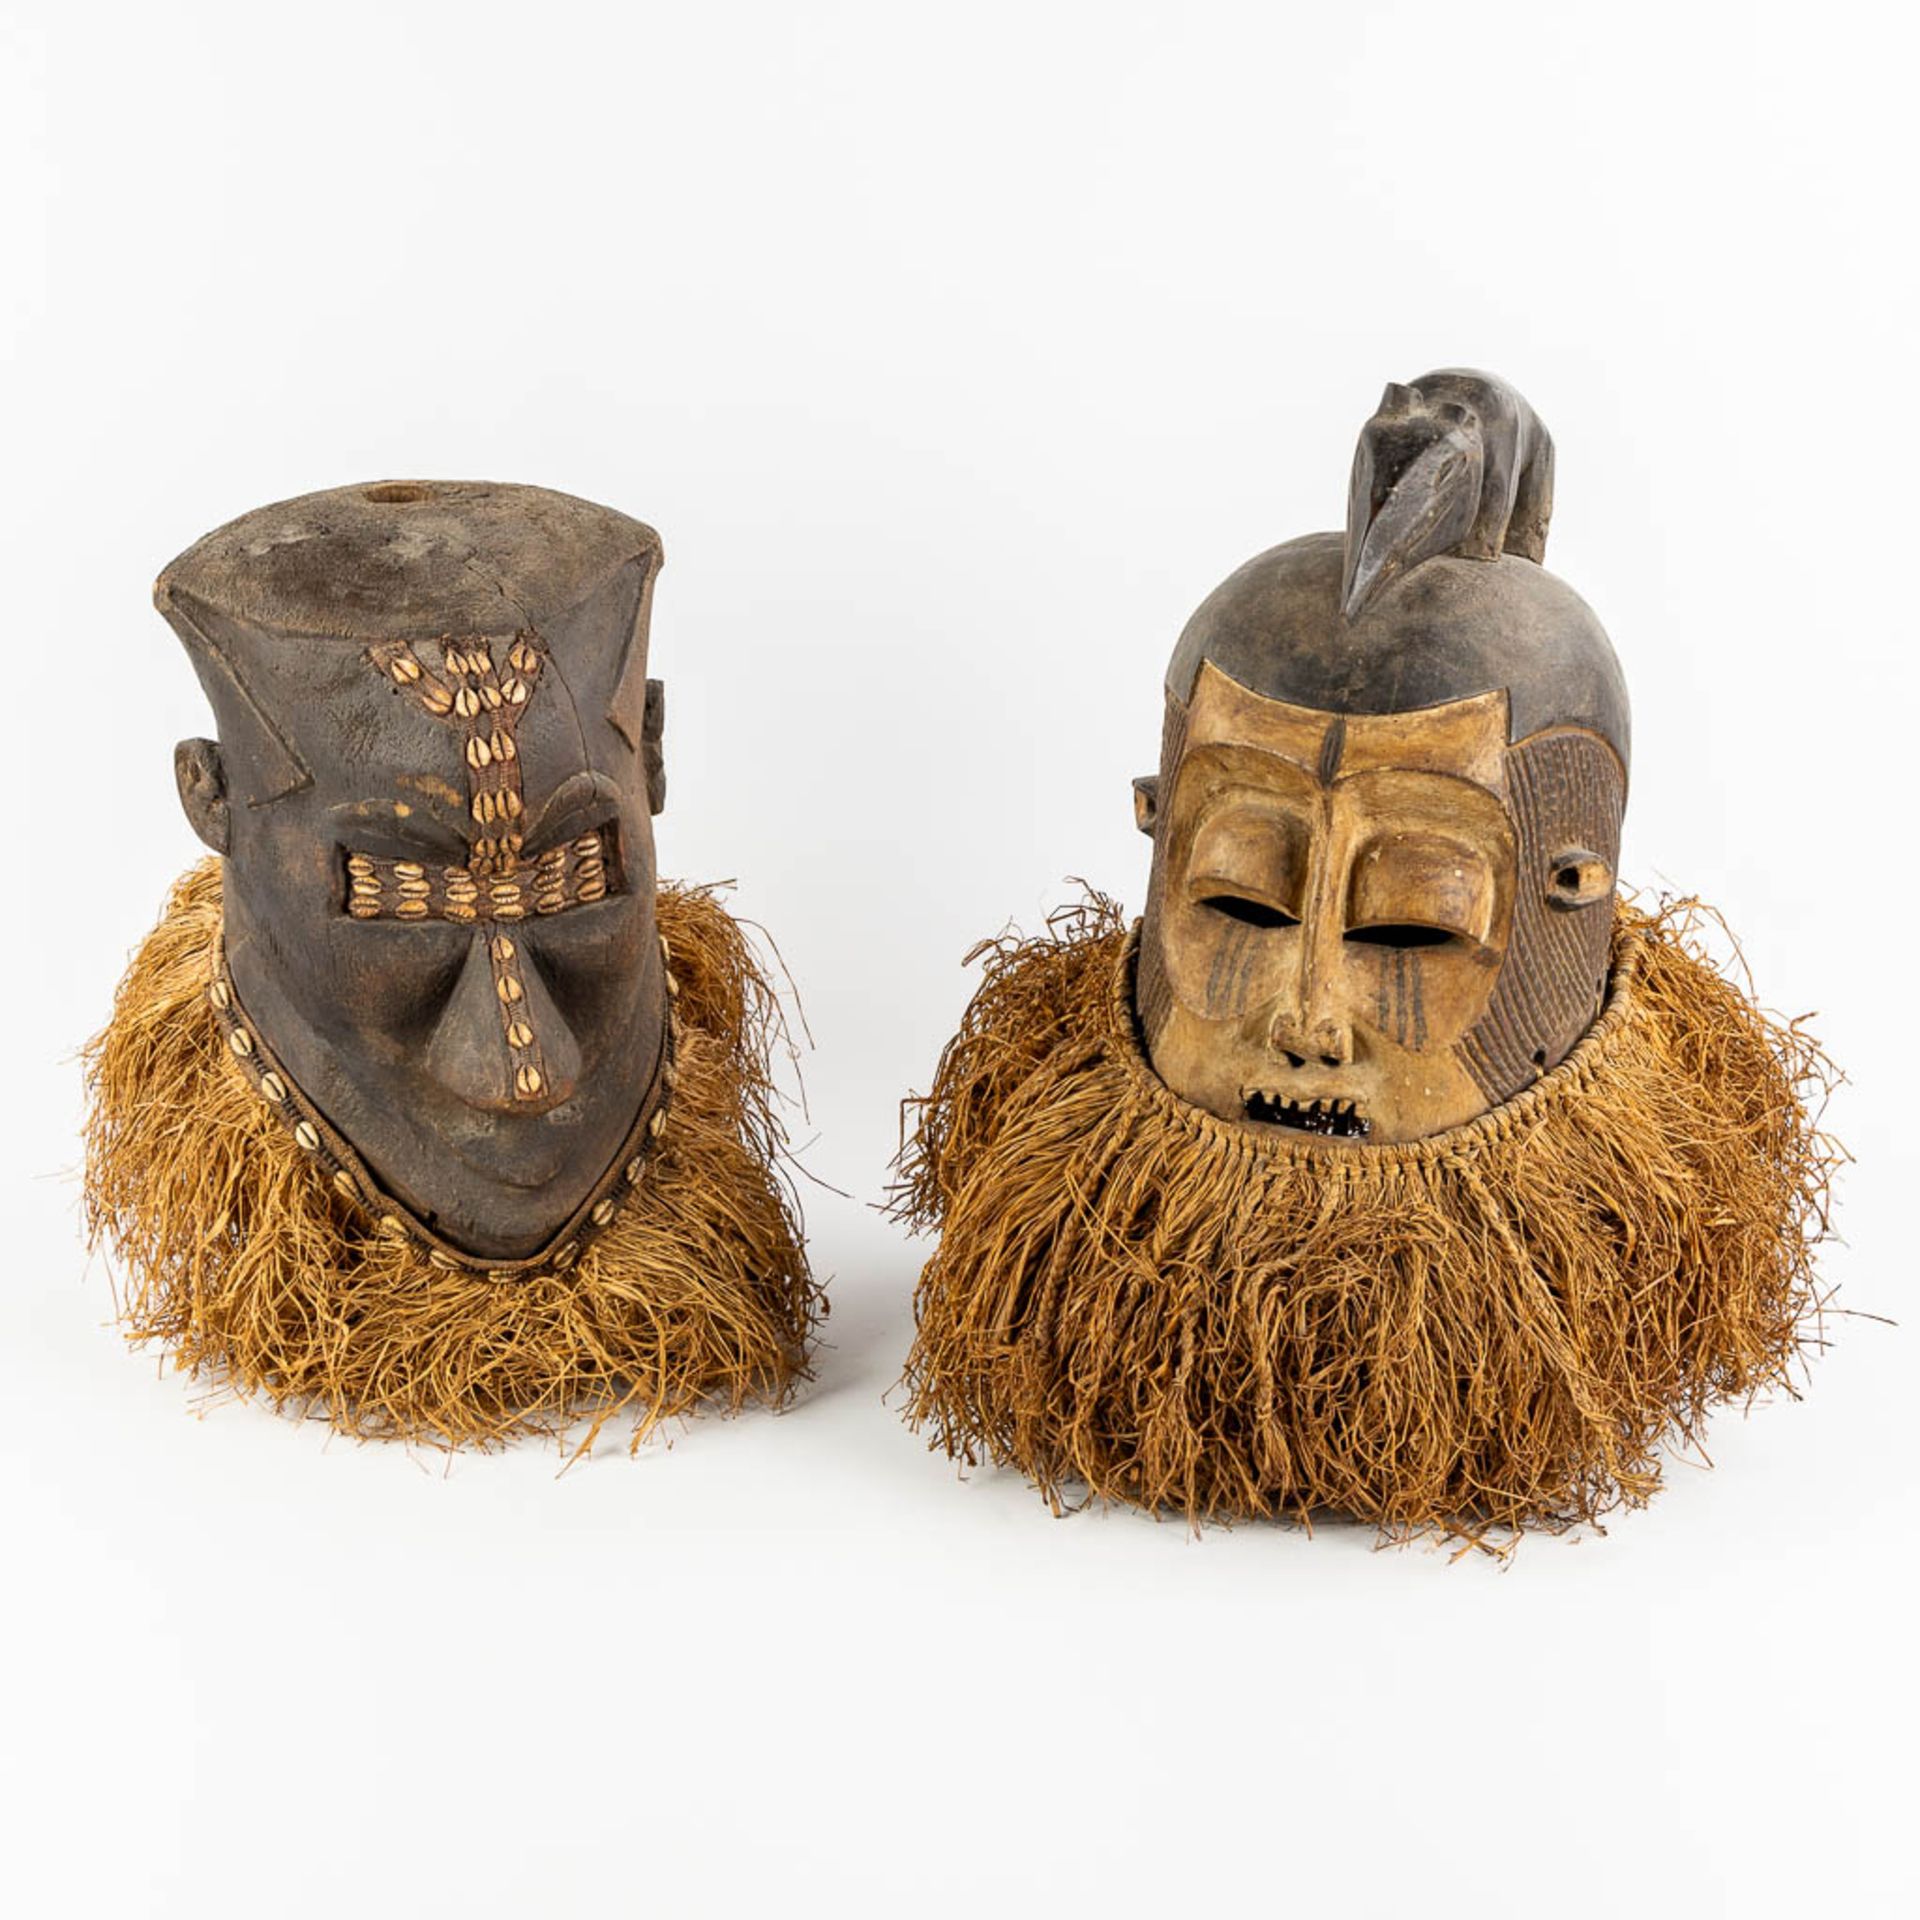 Suku Tribe, two decorative African masks. Wood and straw. (L:44 x W:40 x H:48 cm)